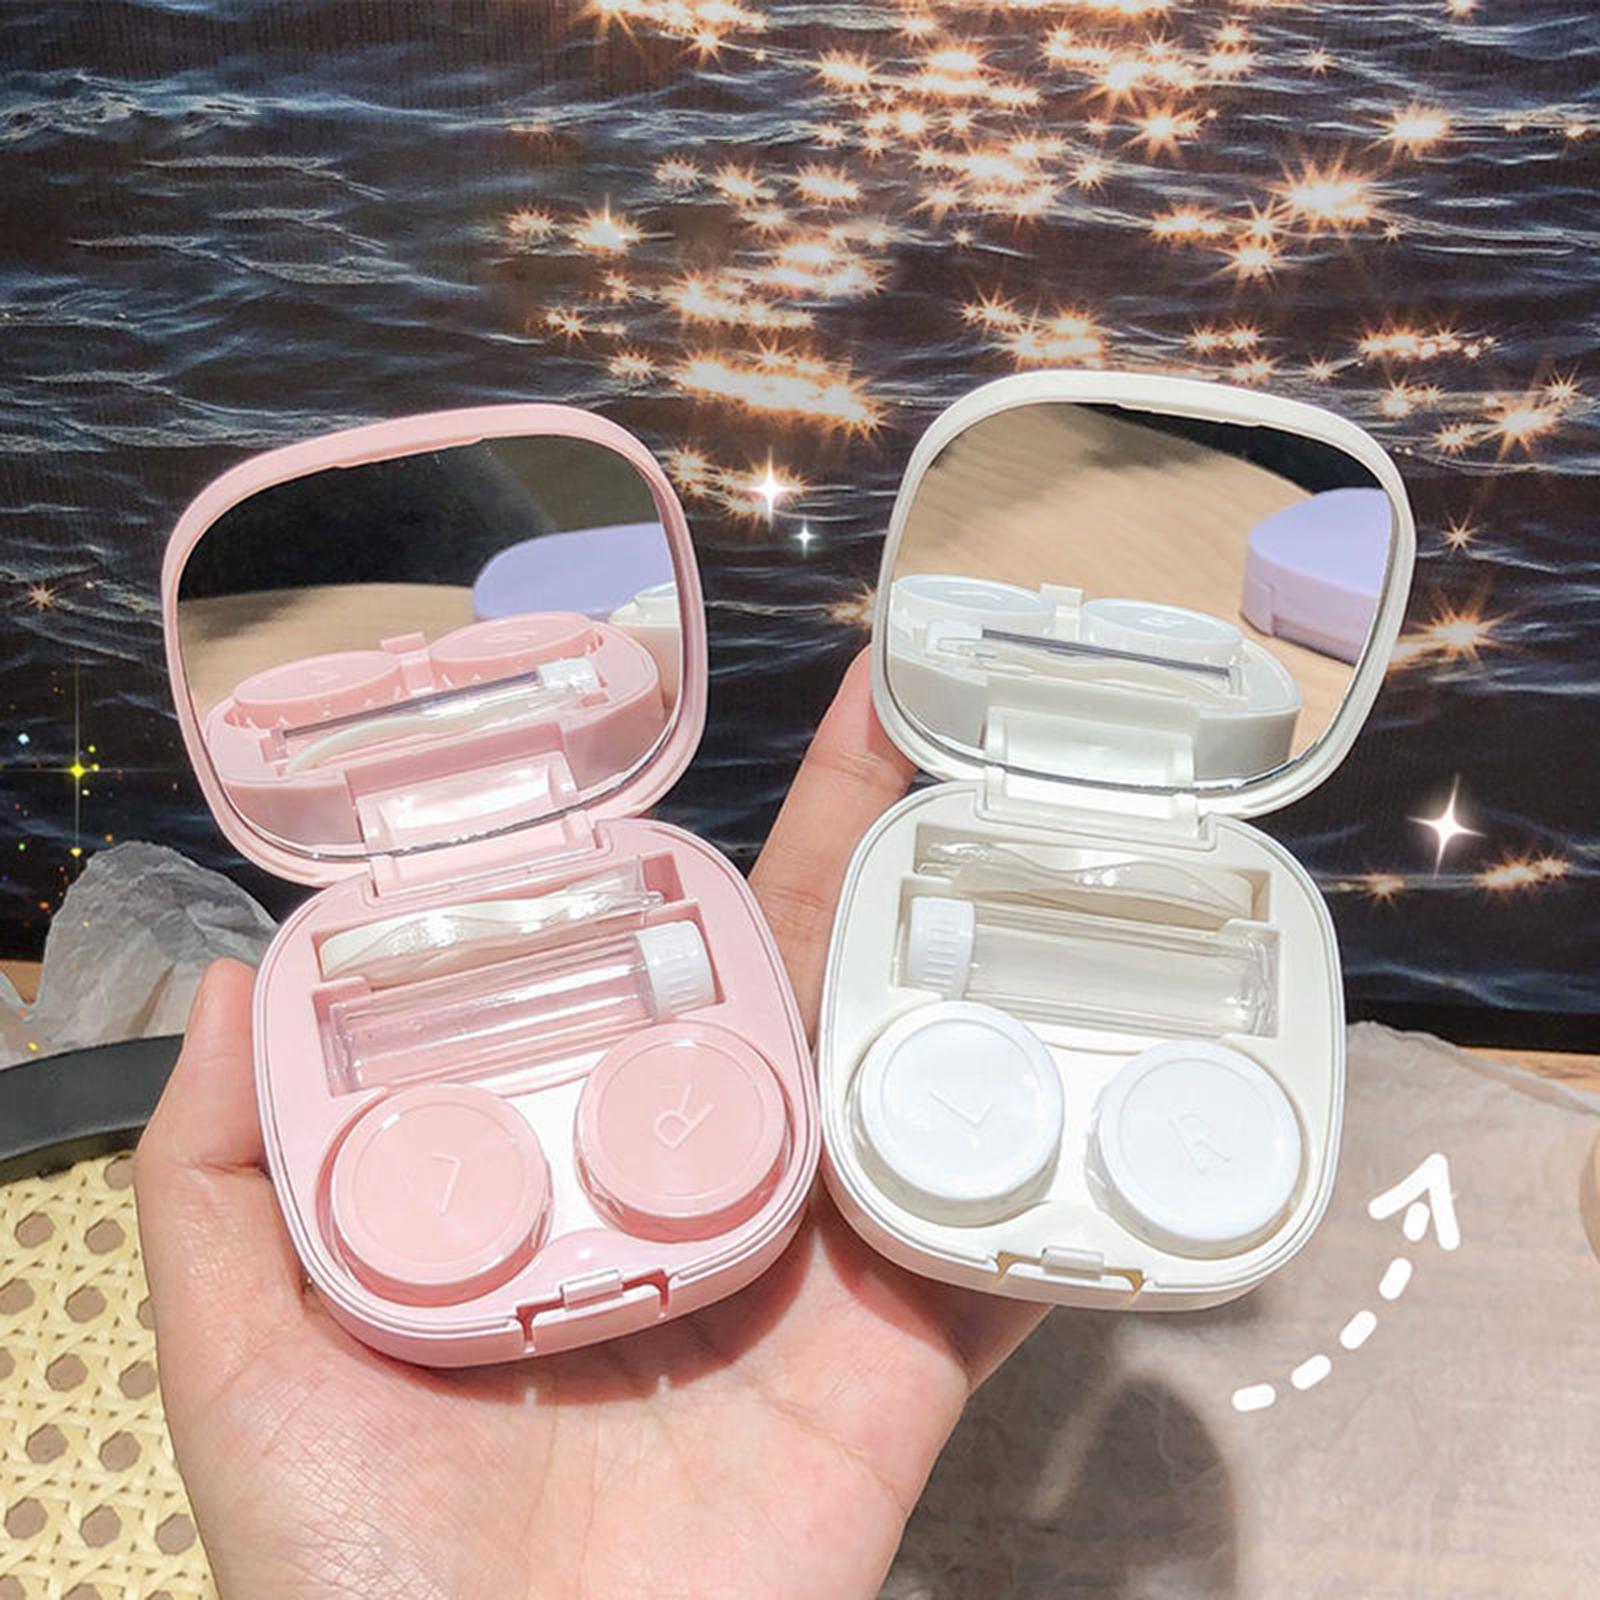 Pack of 3 Compact Contact Lens Case Kit with Mirror Durable Convenient Small White